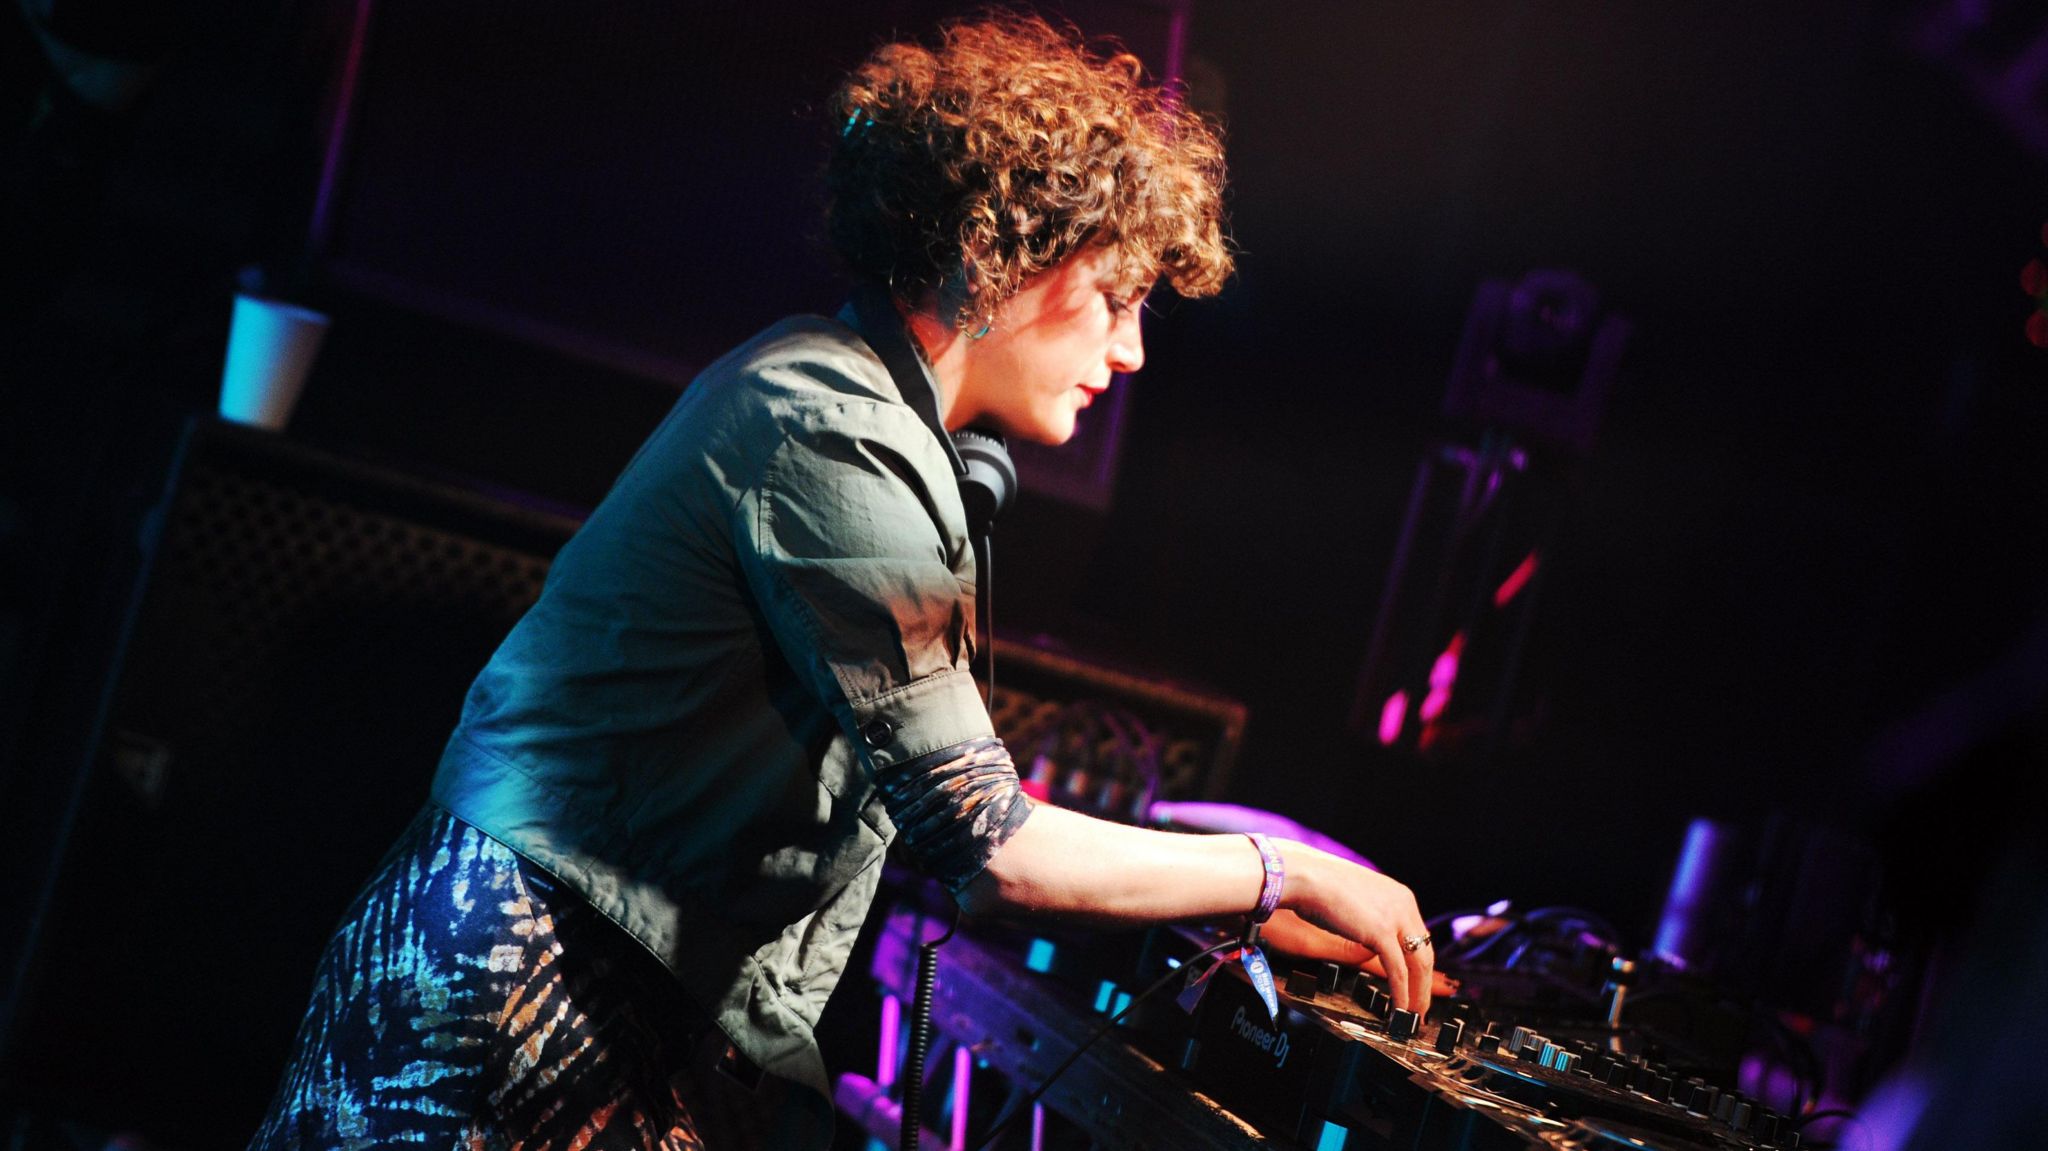 DJ Annie Mac performing. She is pictured standing at her decks.